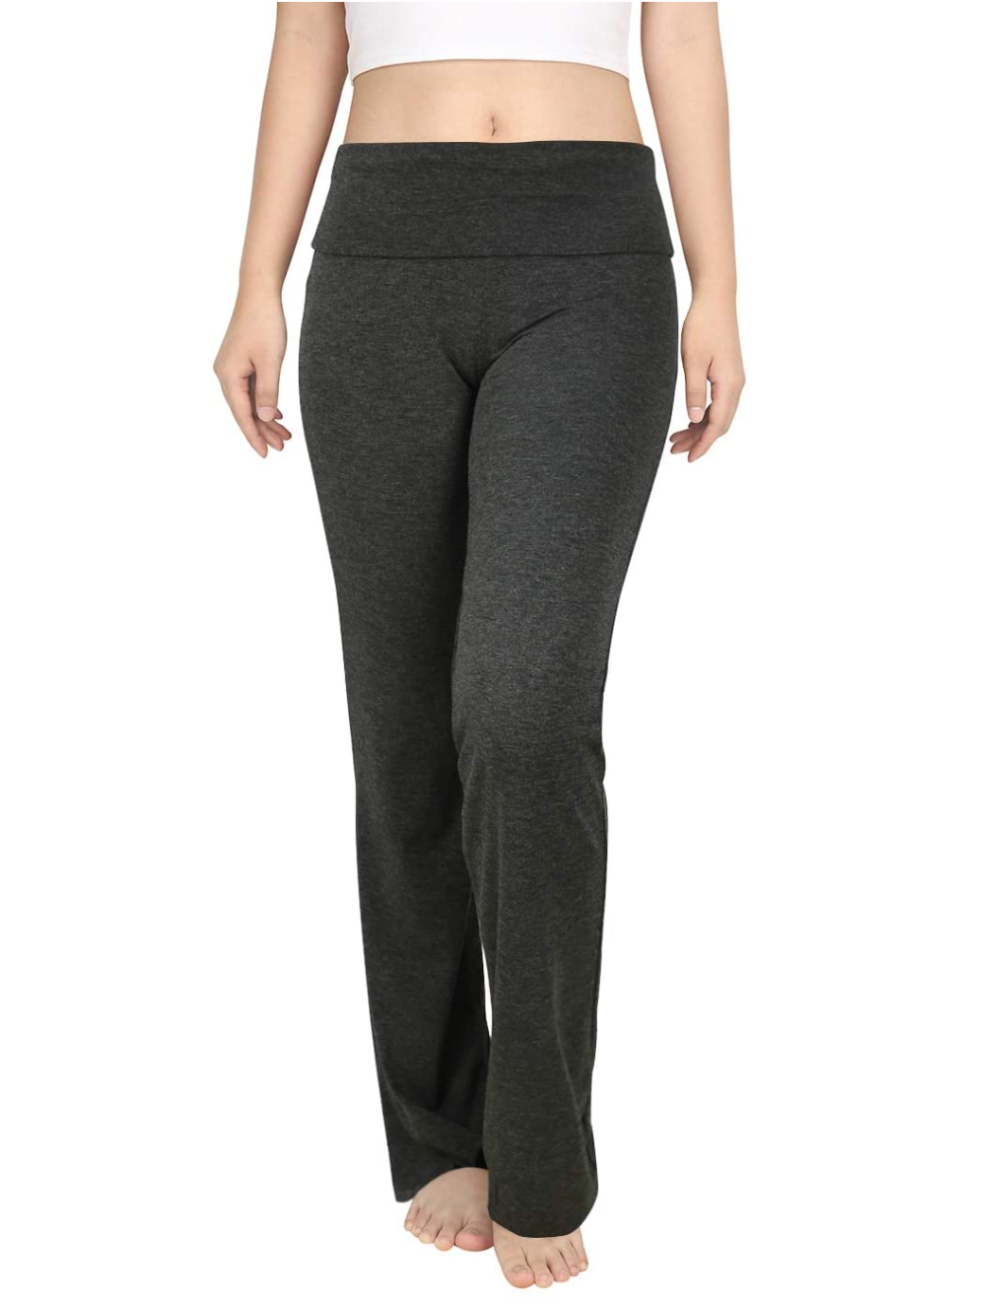 HDE Casual Lounge Pants Are the Perfect Work-From-Home Bottoms